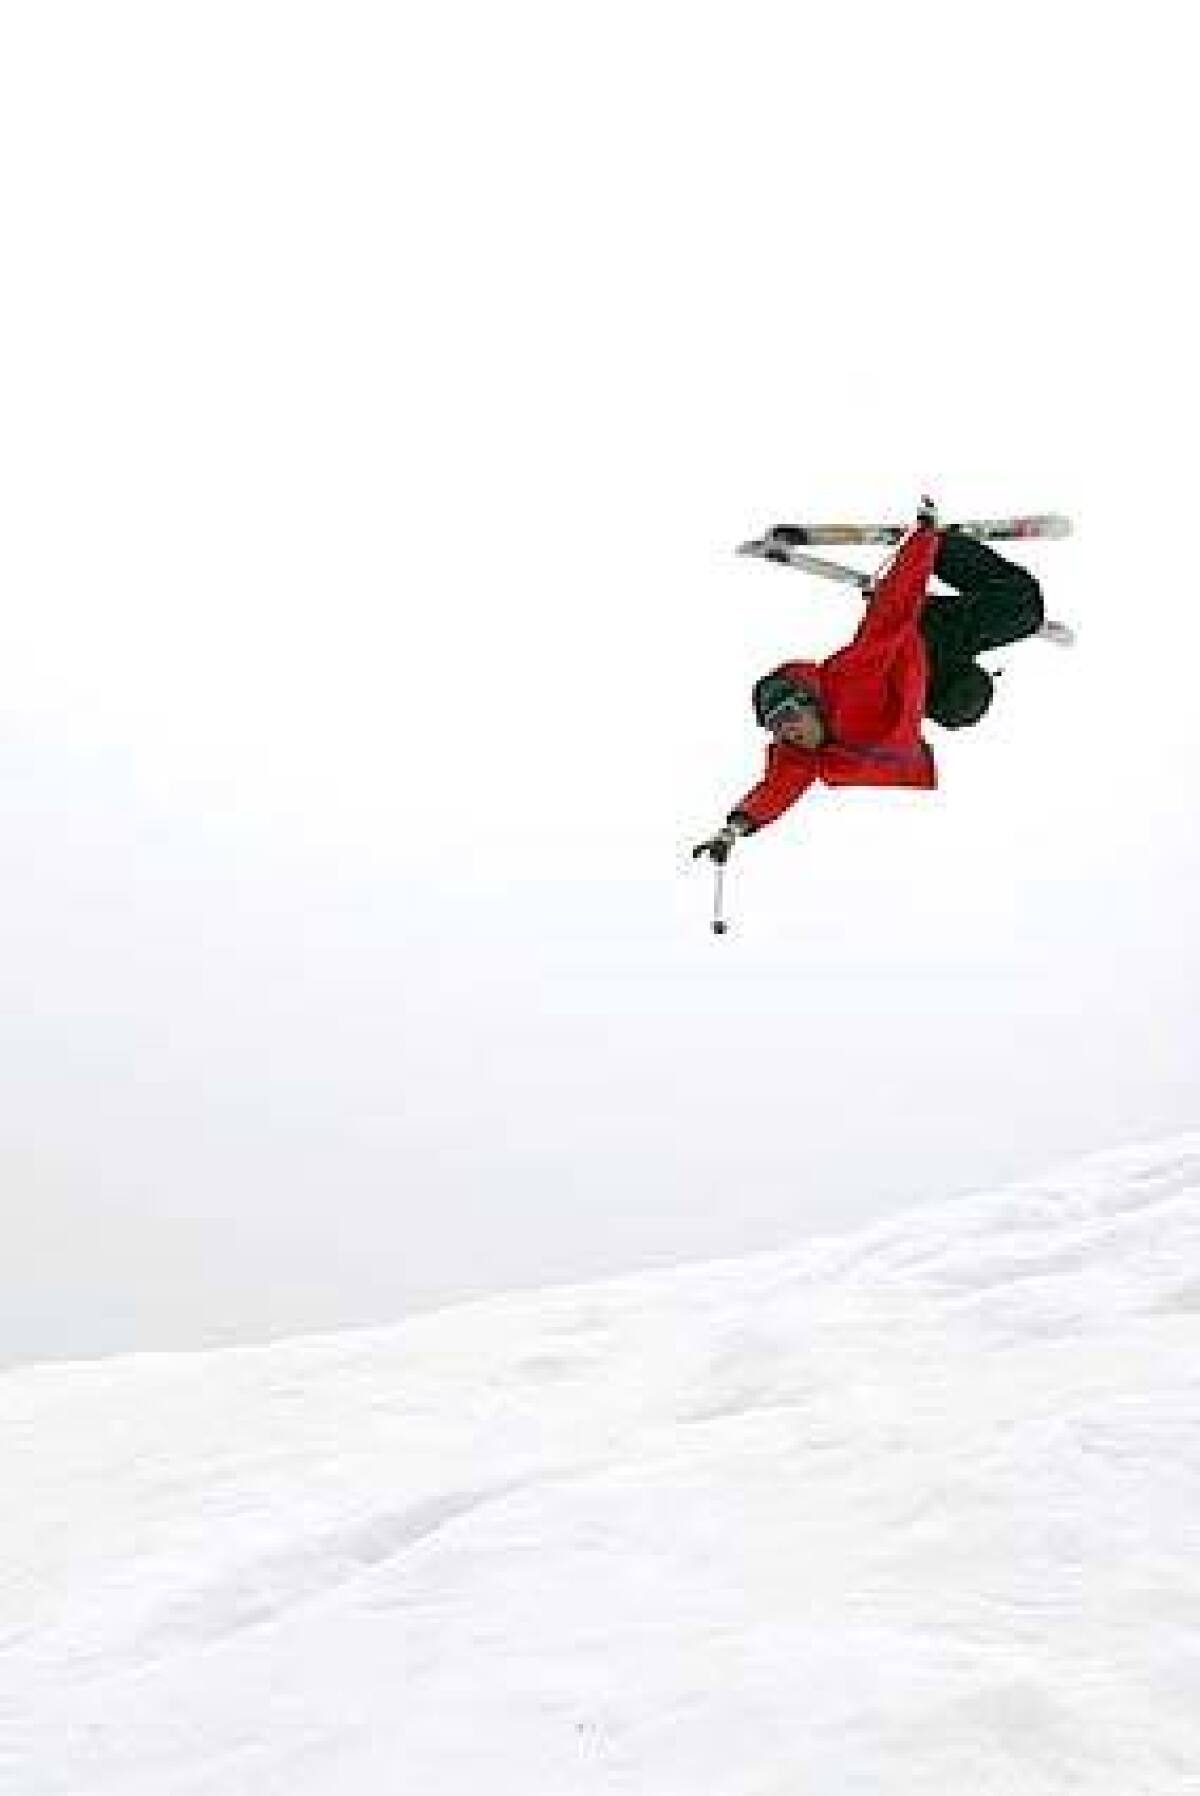 Robby Ellingson flips after skiing one of Mt. Baldy's terrain features.